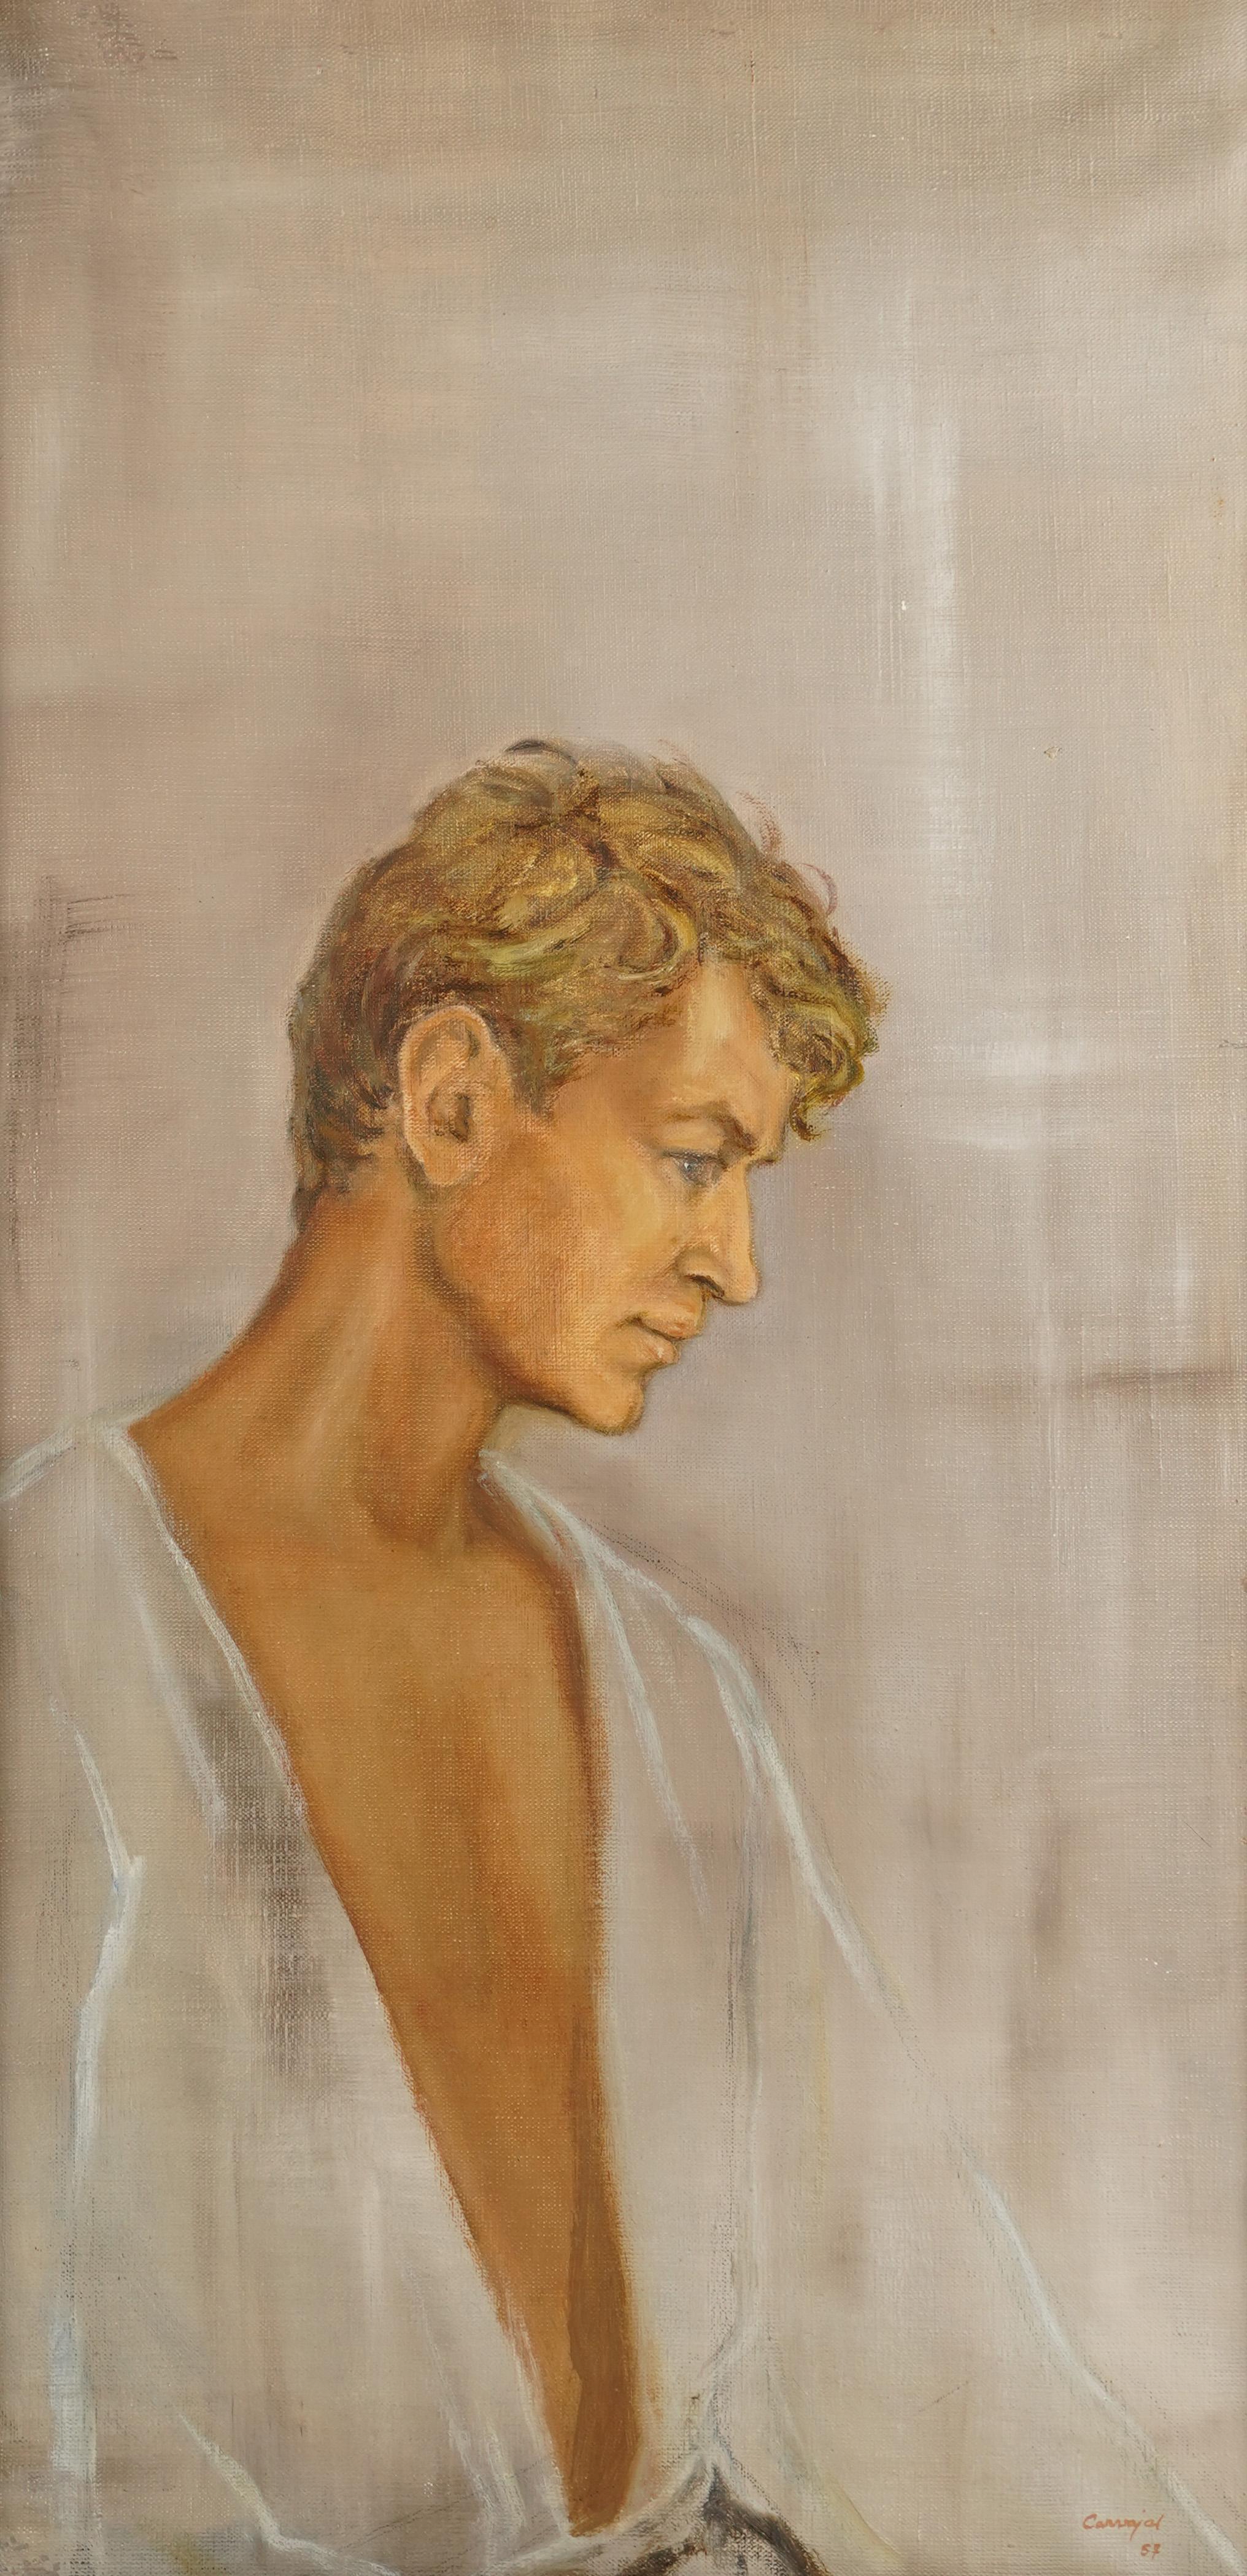 Vintage American Modernist Young Blond Male Portrait Signed Framed Oil Painting 1